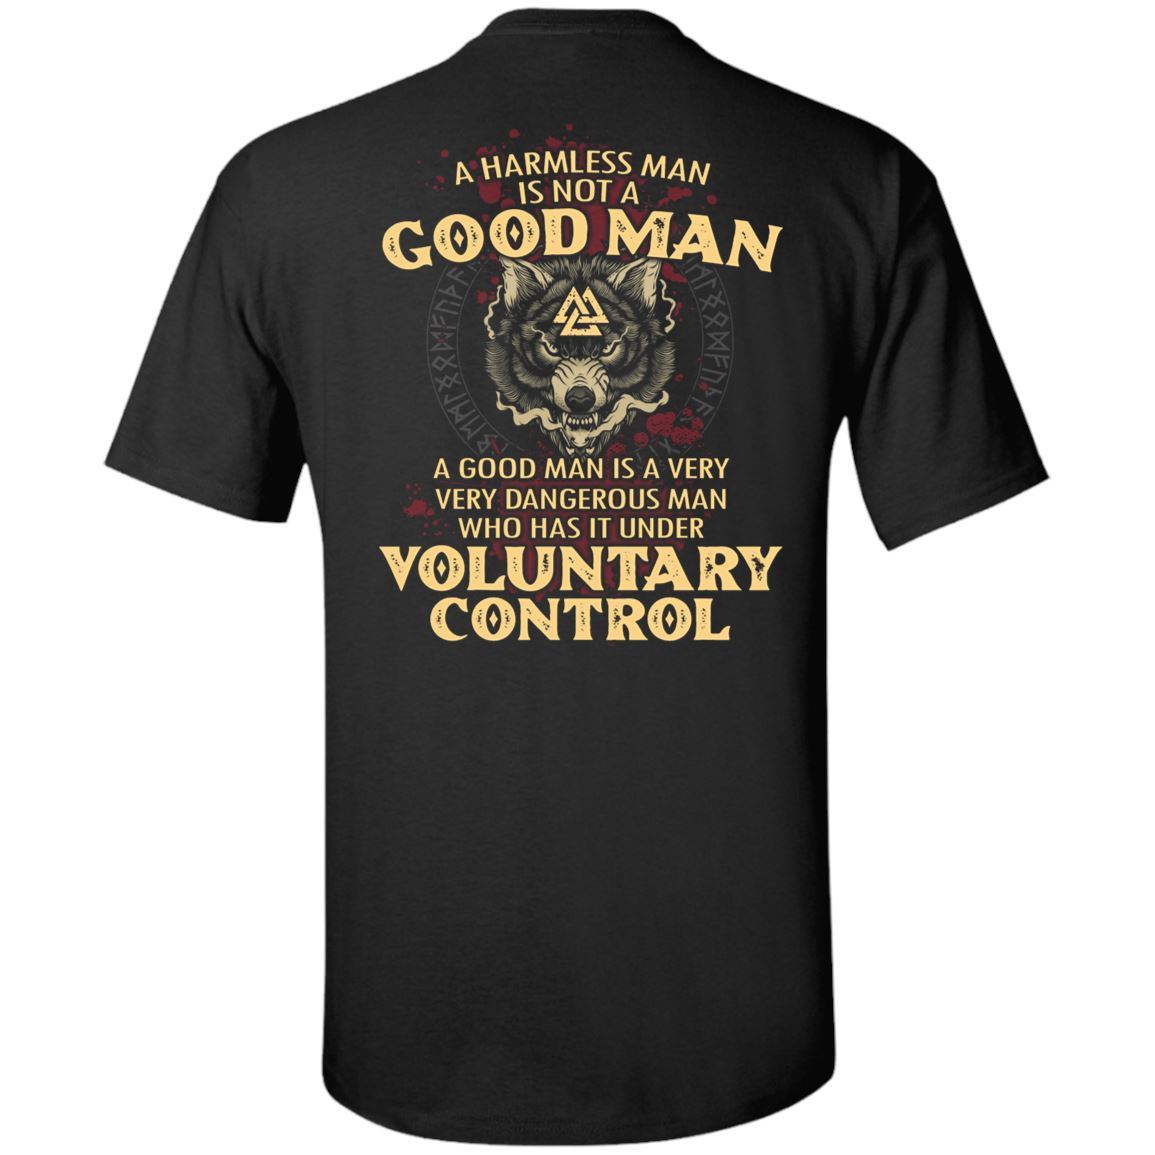 viking norse gym t shirt apparel a harmless man is not a good man backapparel heathen by nature authentic viking products tall ultra cotton t shirtblackxlt 519549 1024x1024@2x